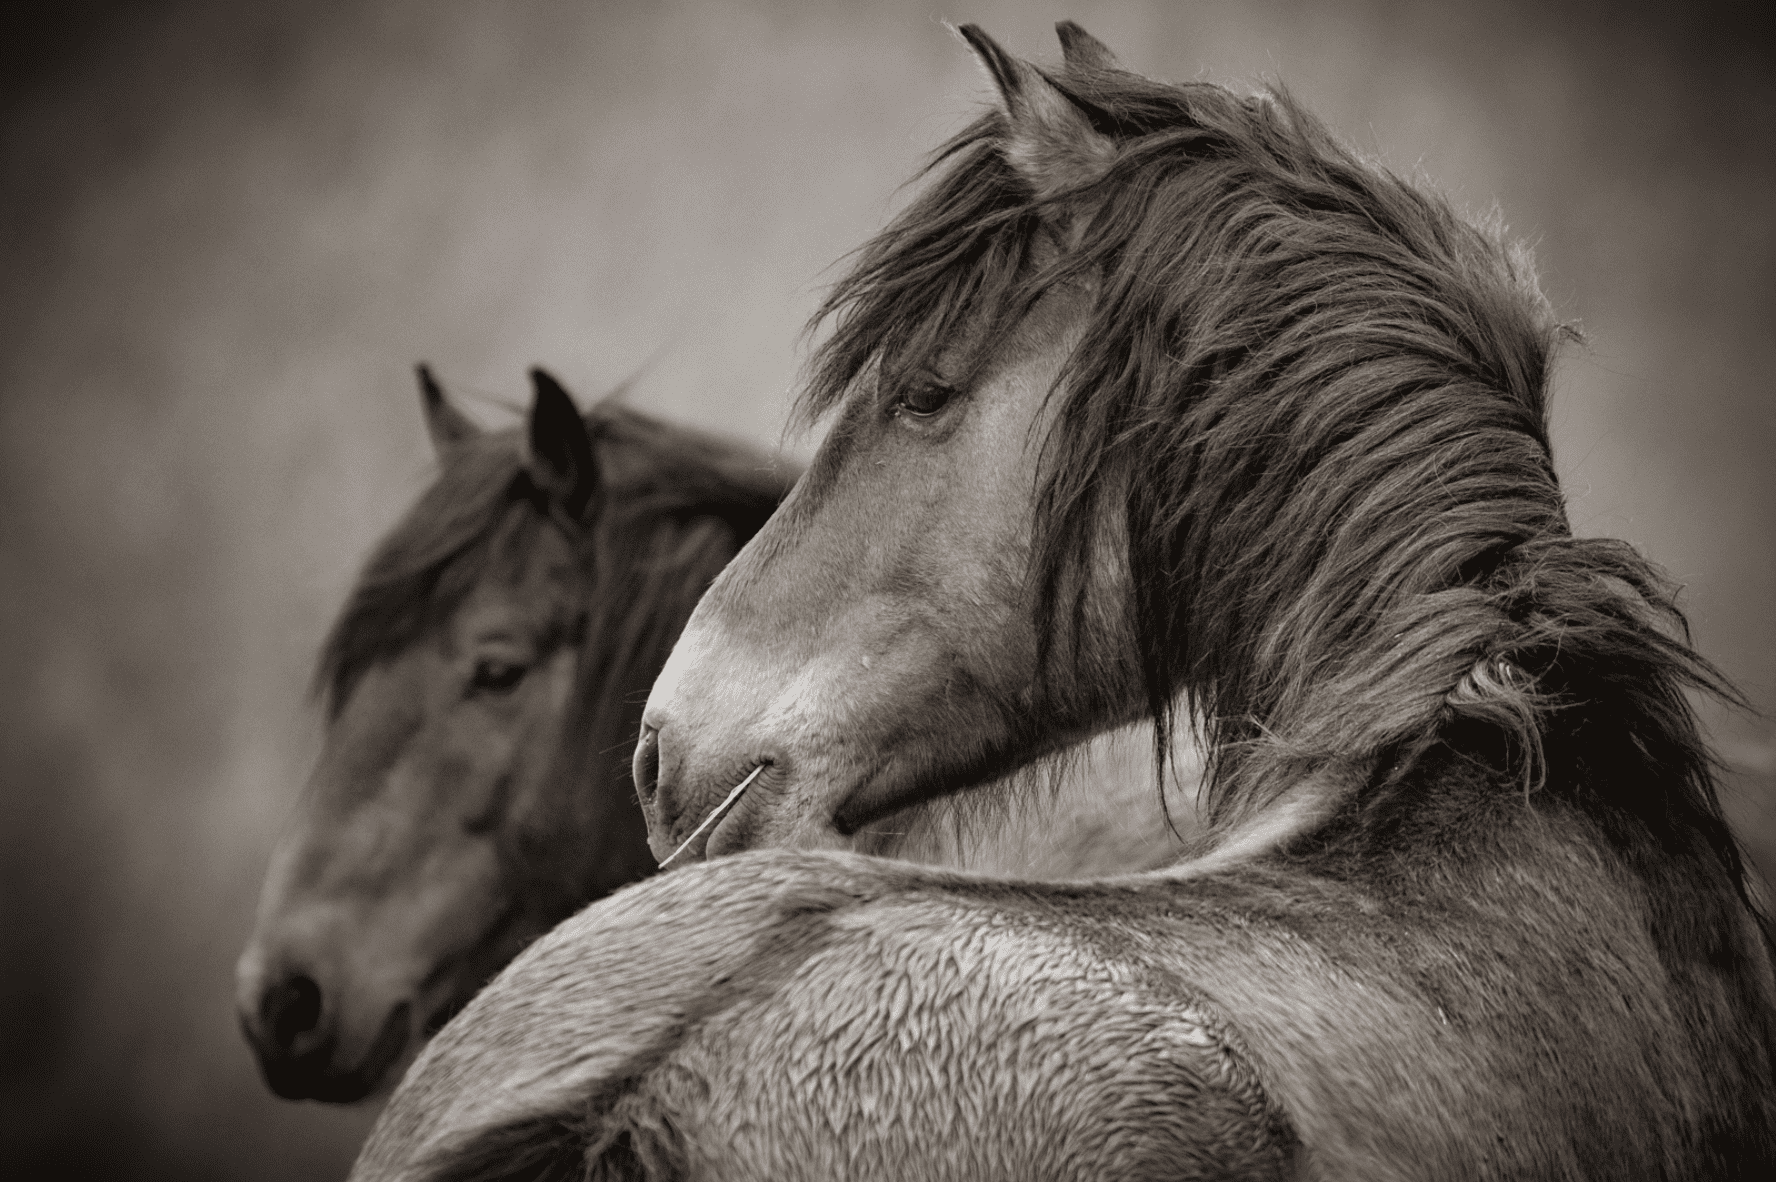 Two Black and White Ponies by Sandy Sharkey